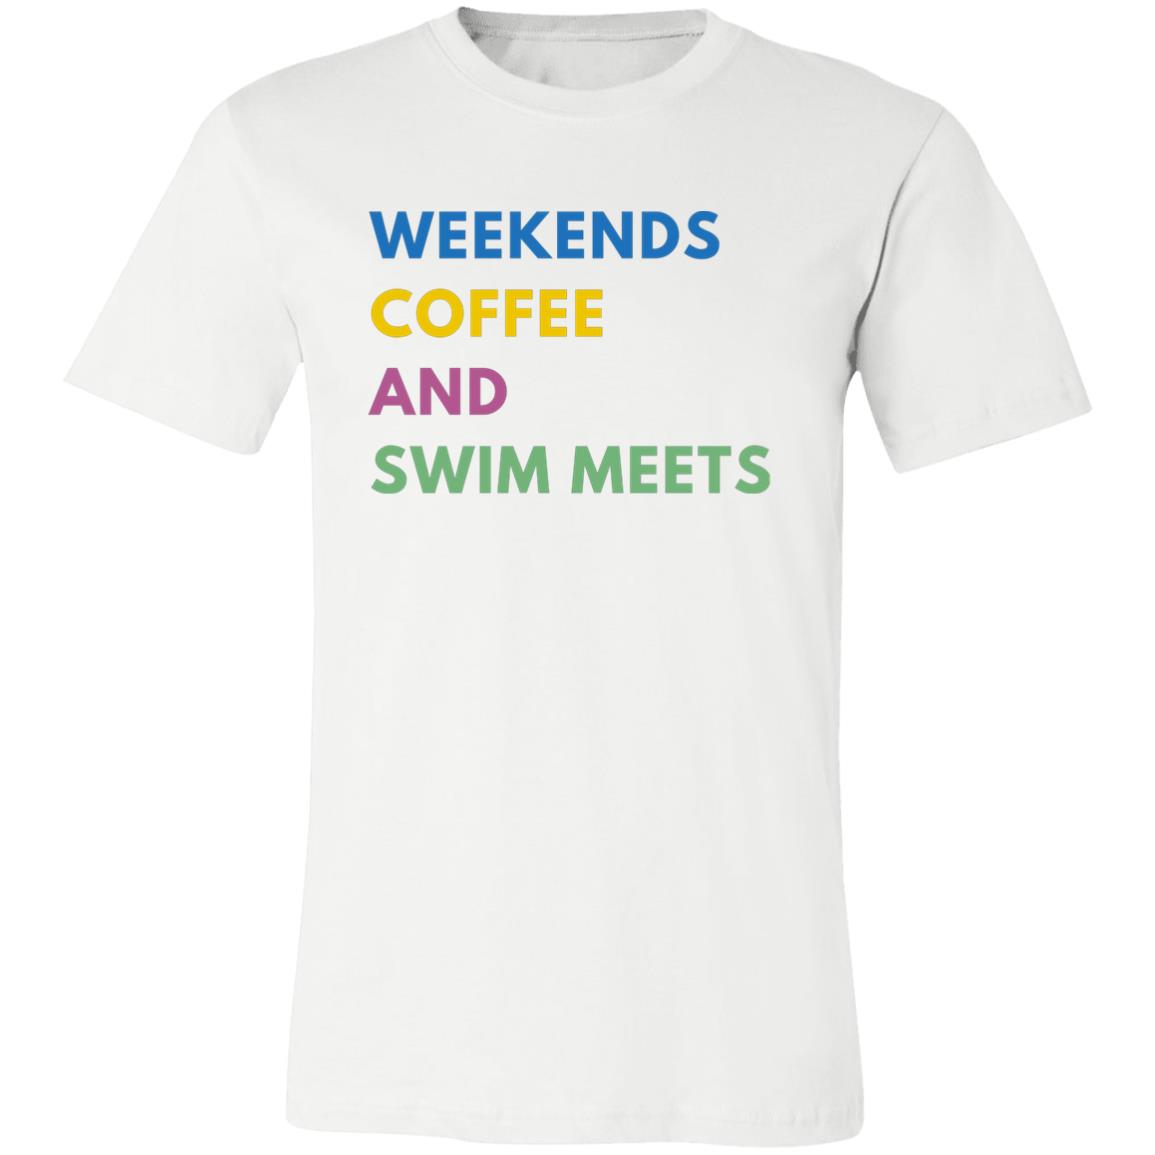 White Weekends Coffee and Swim Meets Comfy Tshirt